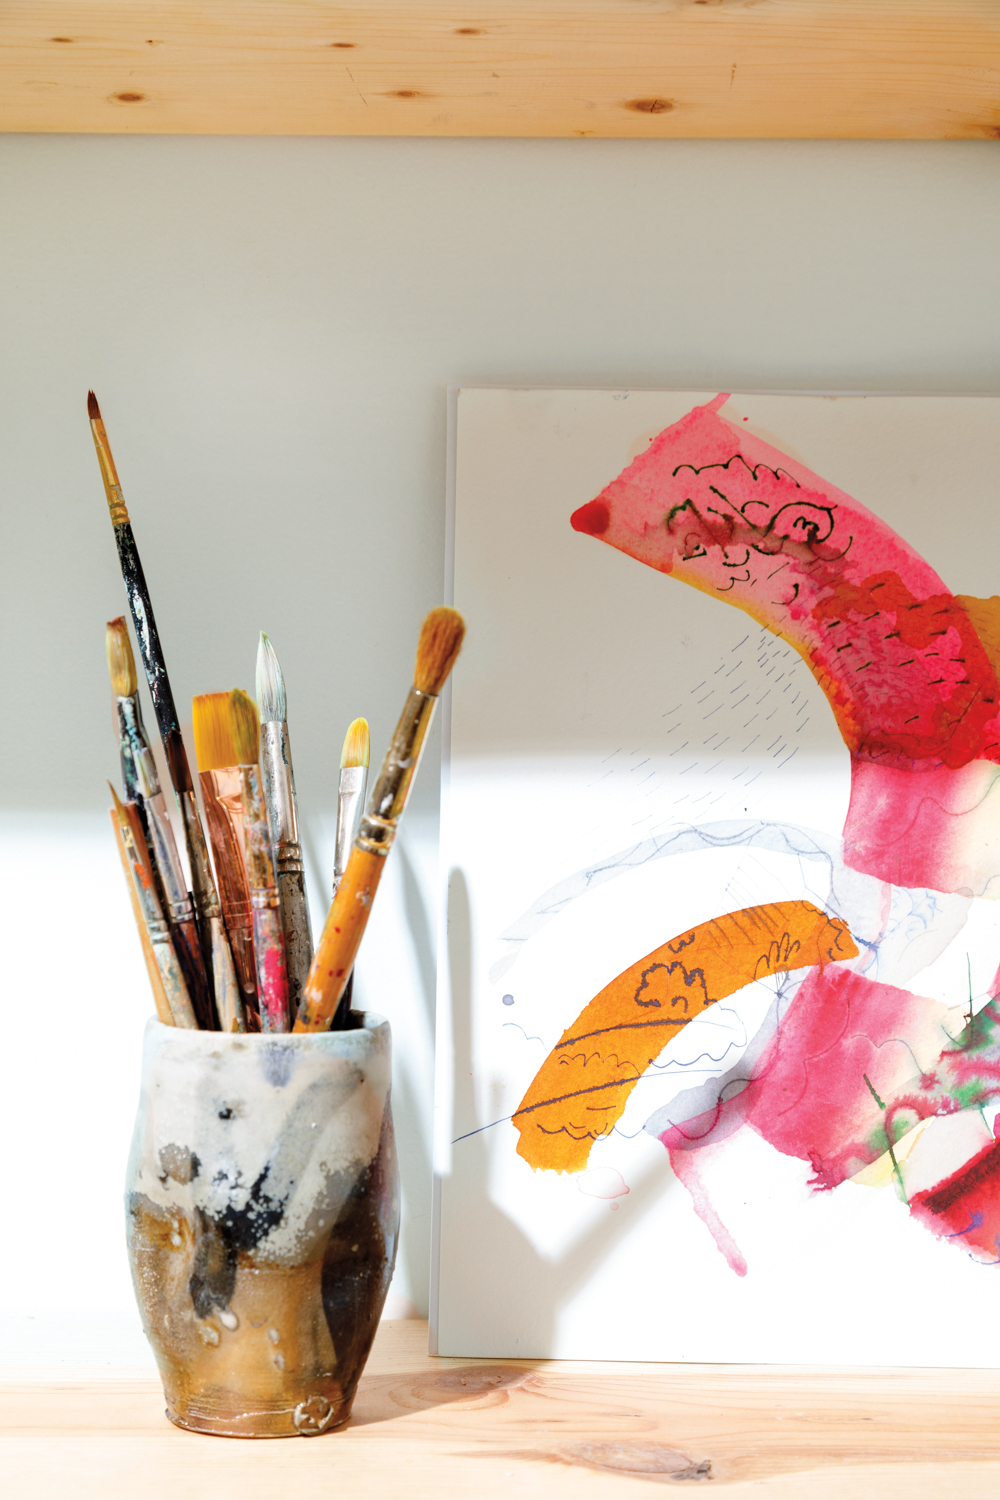 Decorative ceramic cup containing paint brushes beside abstract watercolor painting